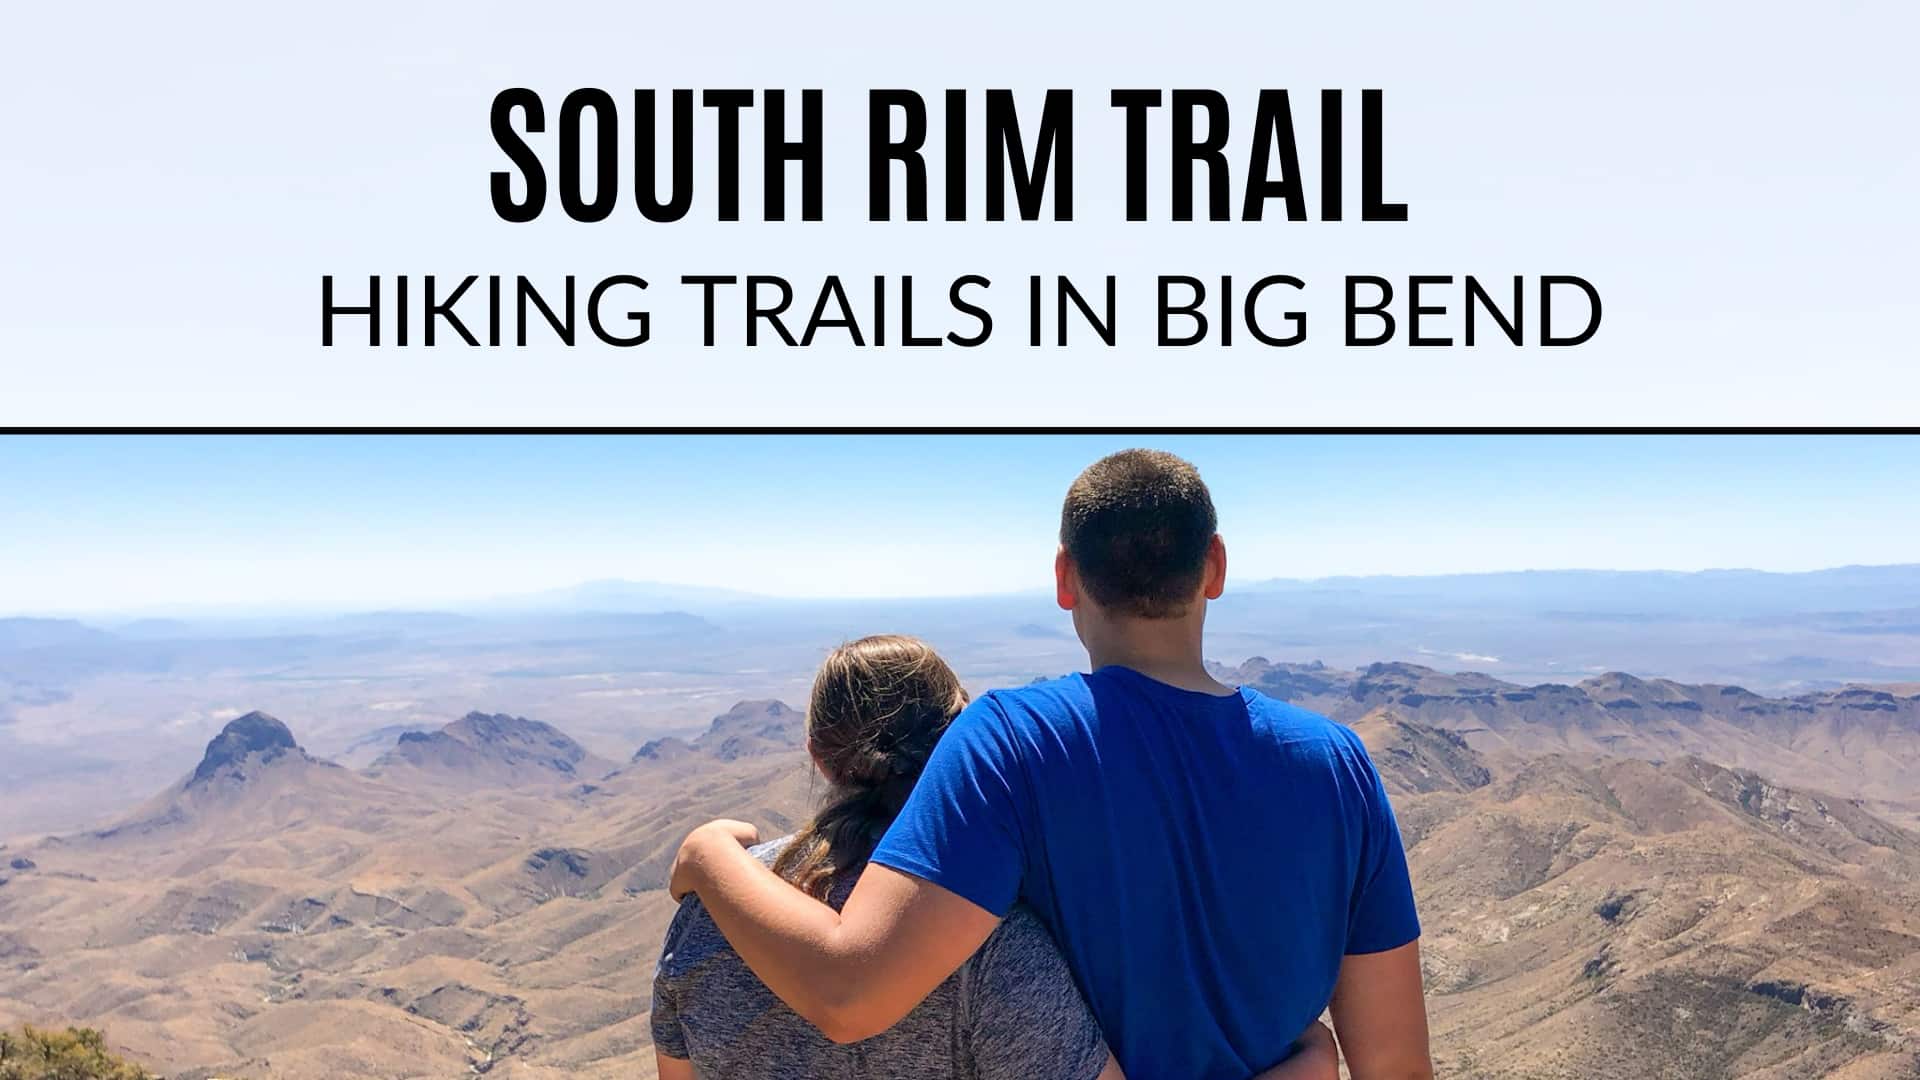 A man and woman overlook the desert from the South Rim Trail. Text on the image says "South Rim Trail Hiking Trails in Big Bend"